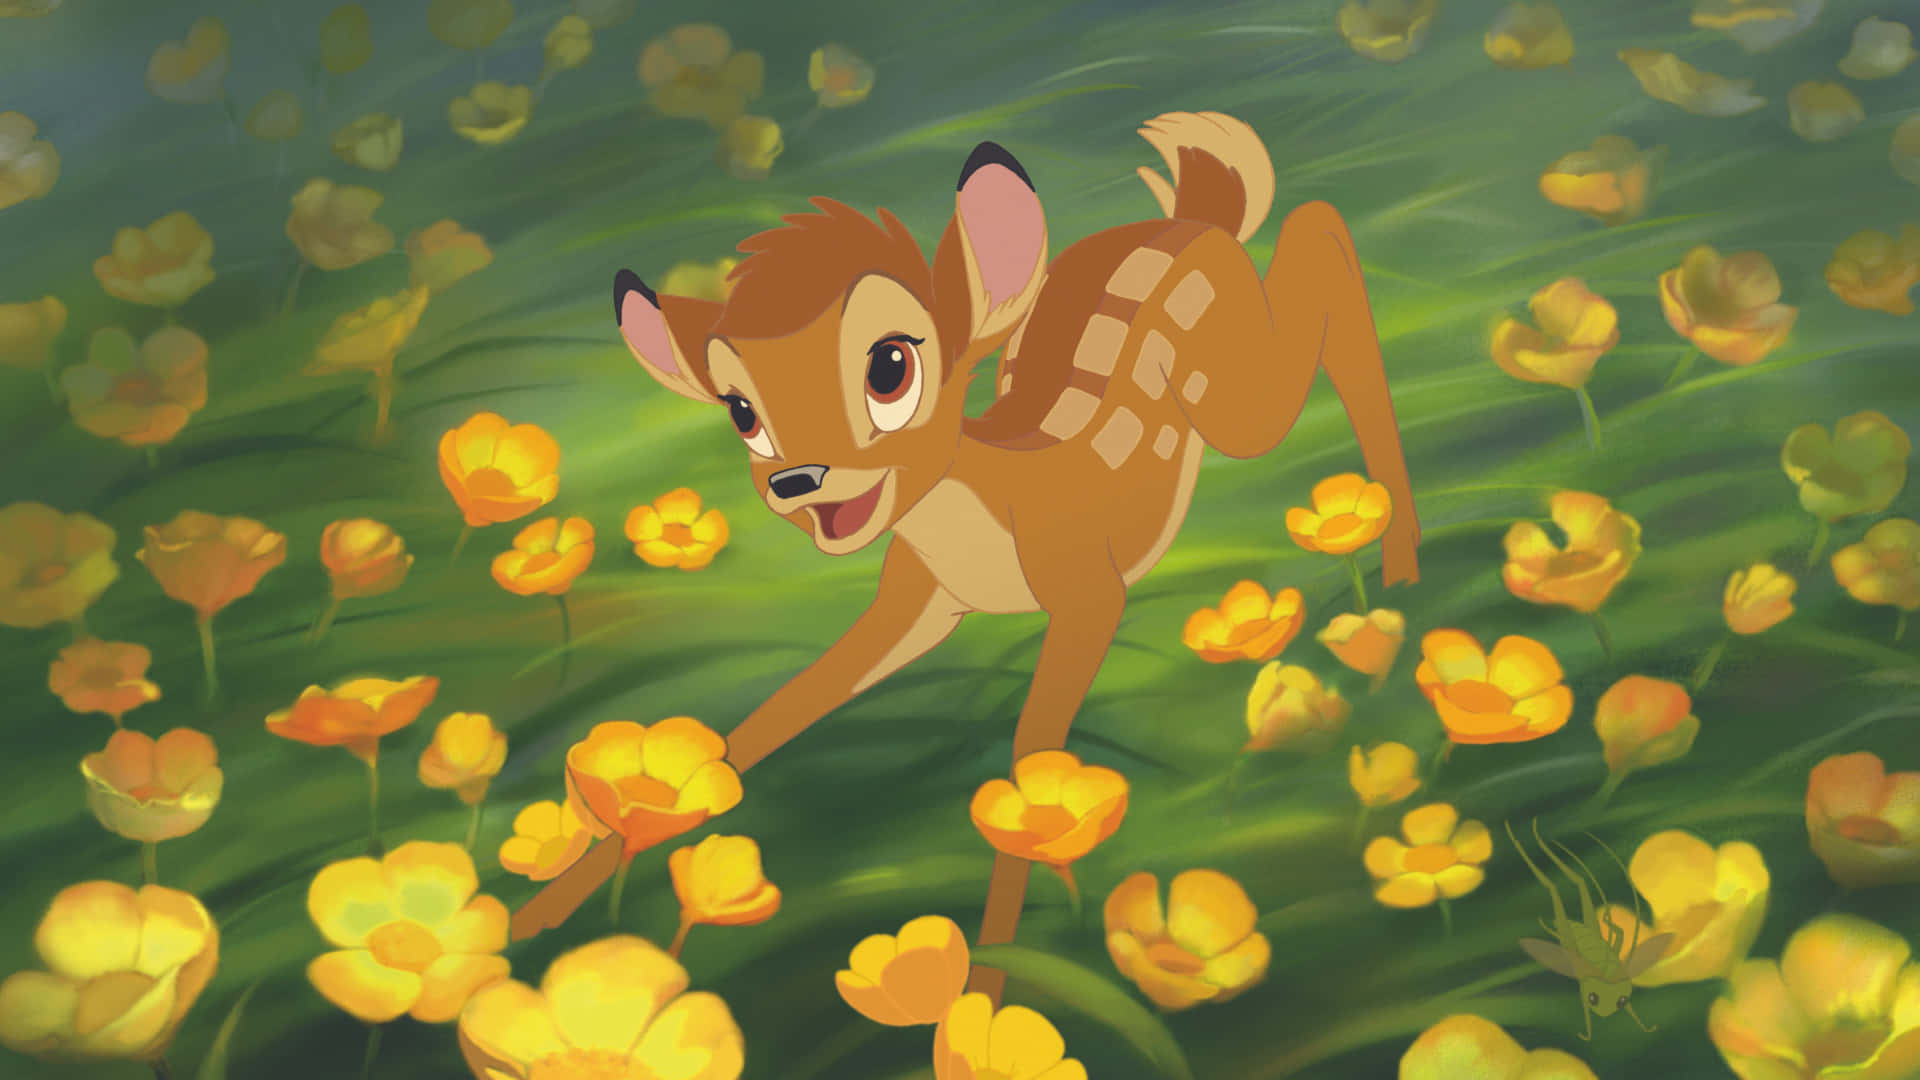 A classic Disney moment with Bambi and Thumper.